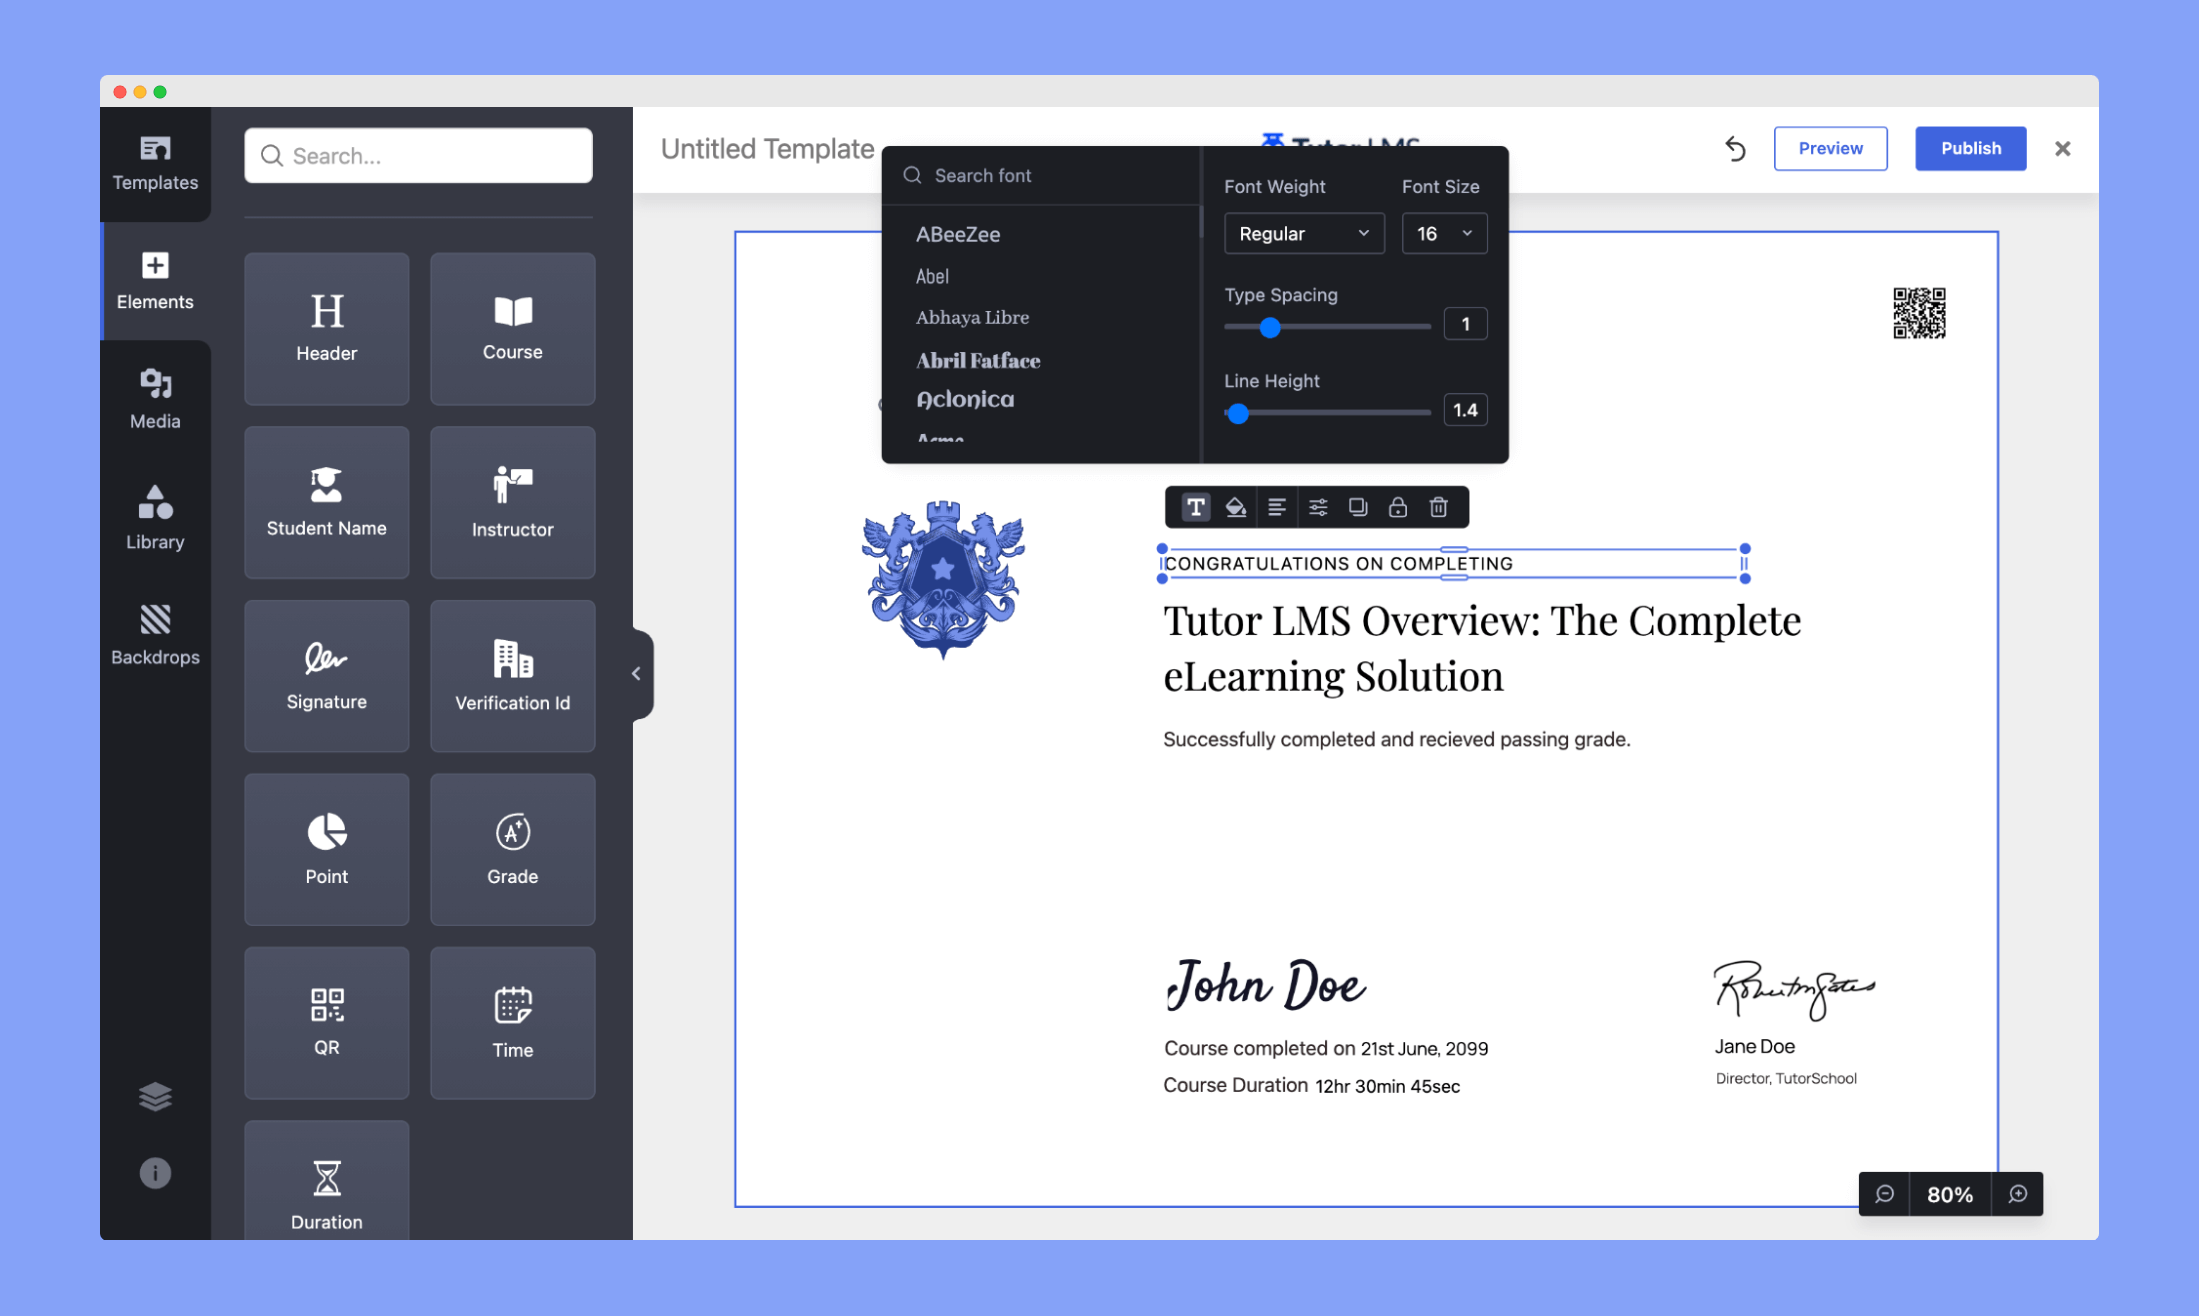 Designing Certificate With a Template